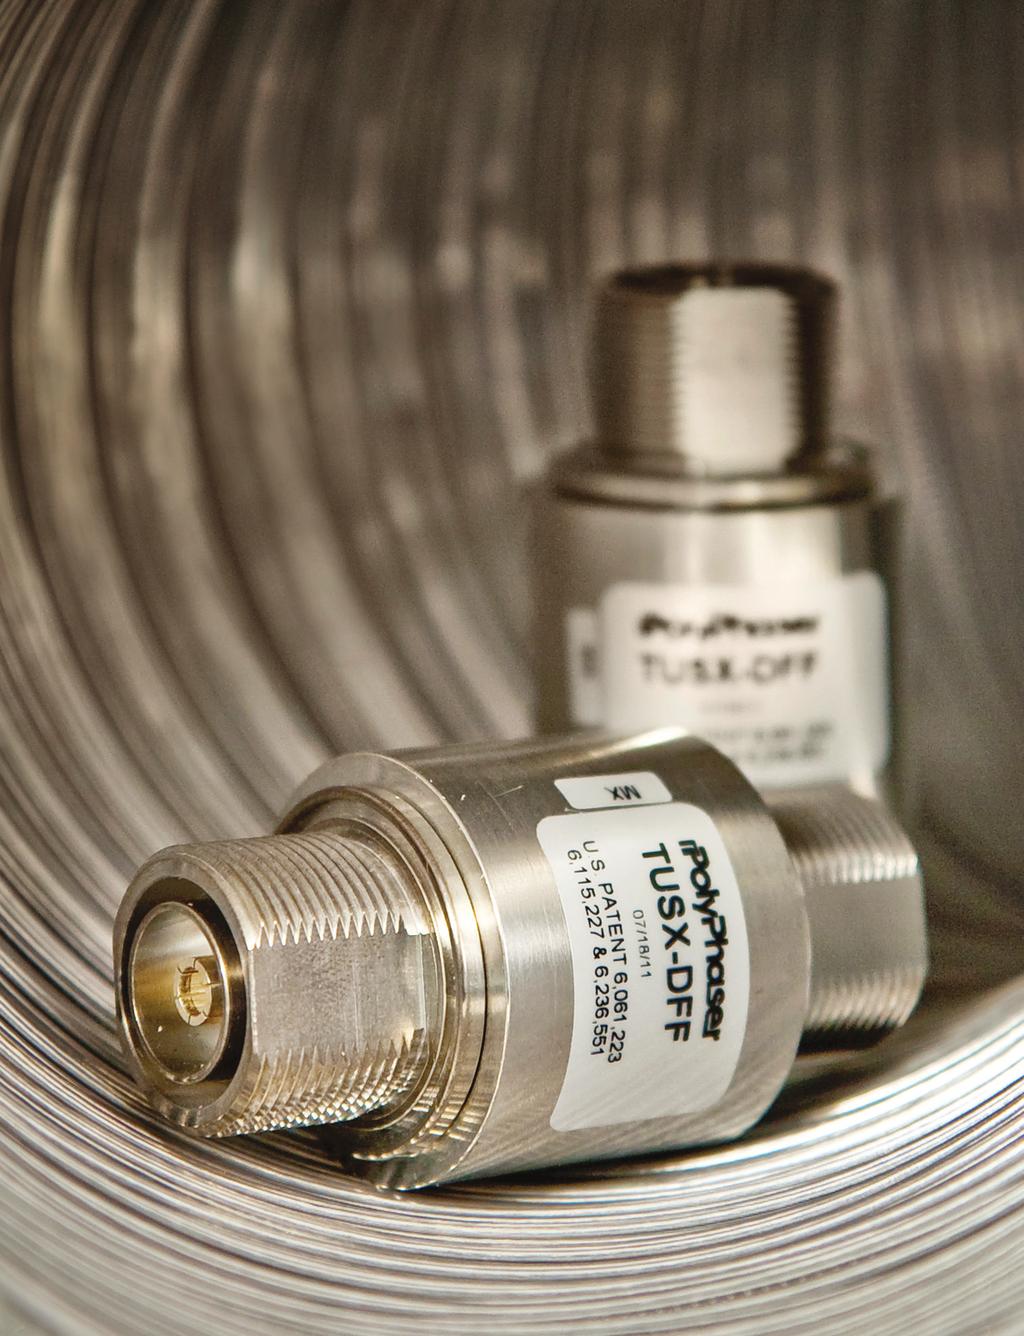 RF Surge Protection Over forty years ago, PolyPhaser pionieered the market with its patented protection solutions for ever-evolving telecommunication systems.